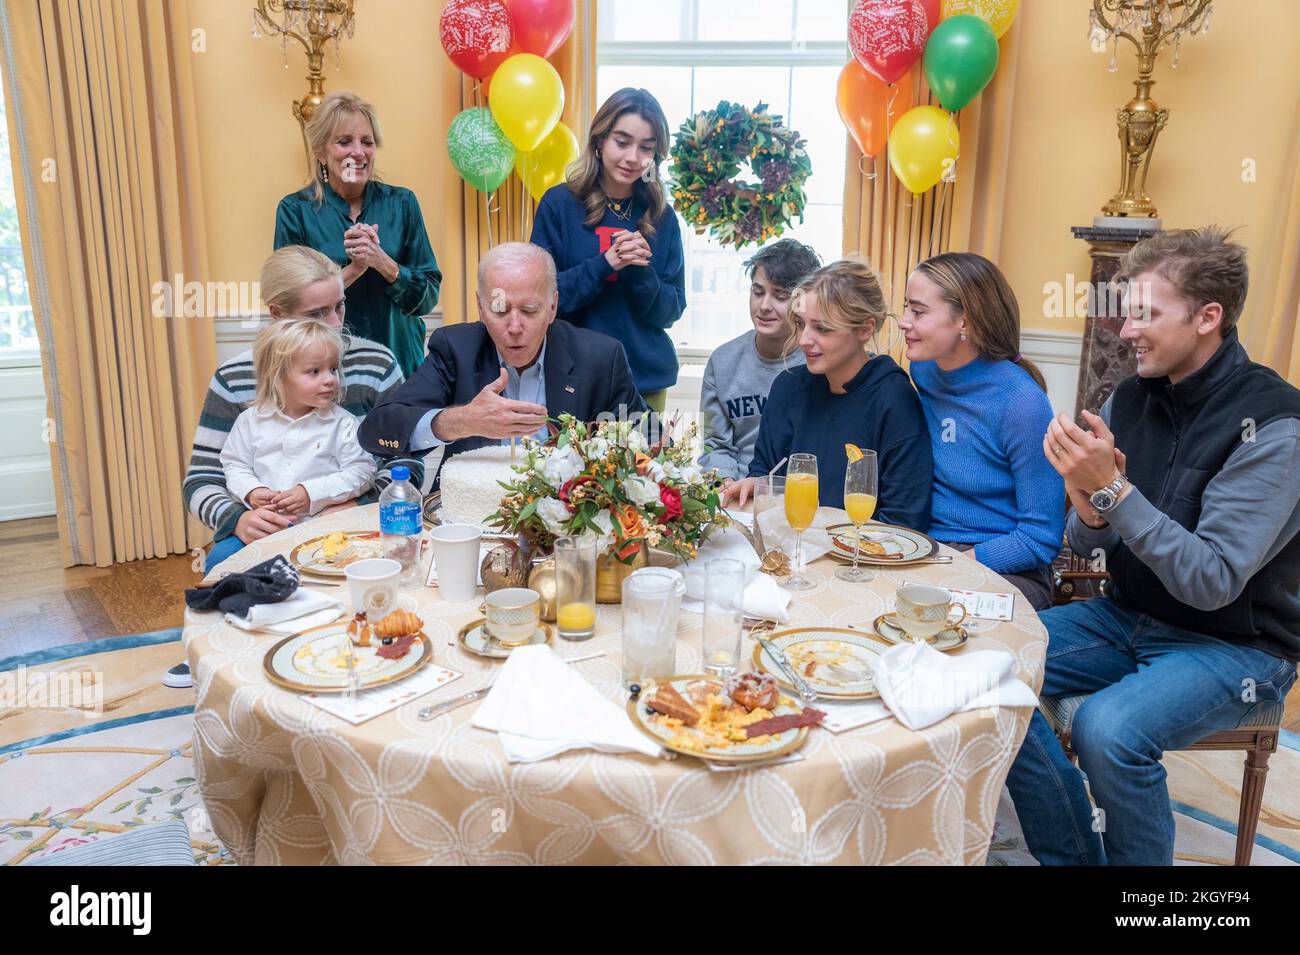 Washington, United States. 20 November, 2022. U.S. President Joe Biden blows out a birthday candle along with First Lady Jill Biden and family members as they celebrate the 80th birthday of the president with a brunch in the residence of the White House, November 20, 2022, in Washington, D.C.  Credit: Adam Schultz/White House Photo/Alamy Live News Stock Photo